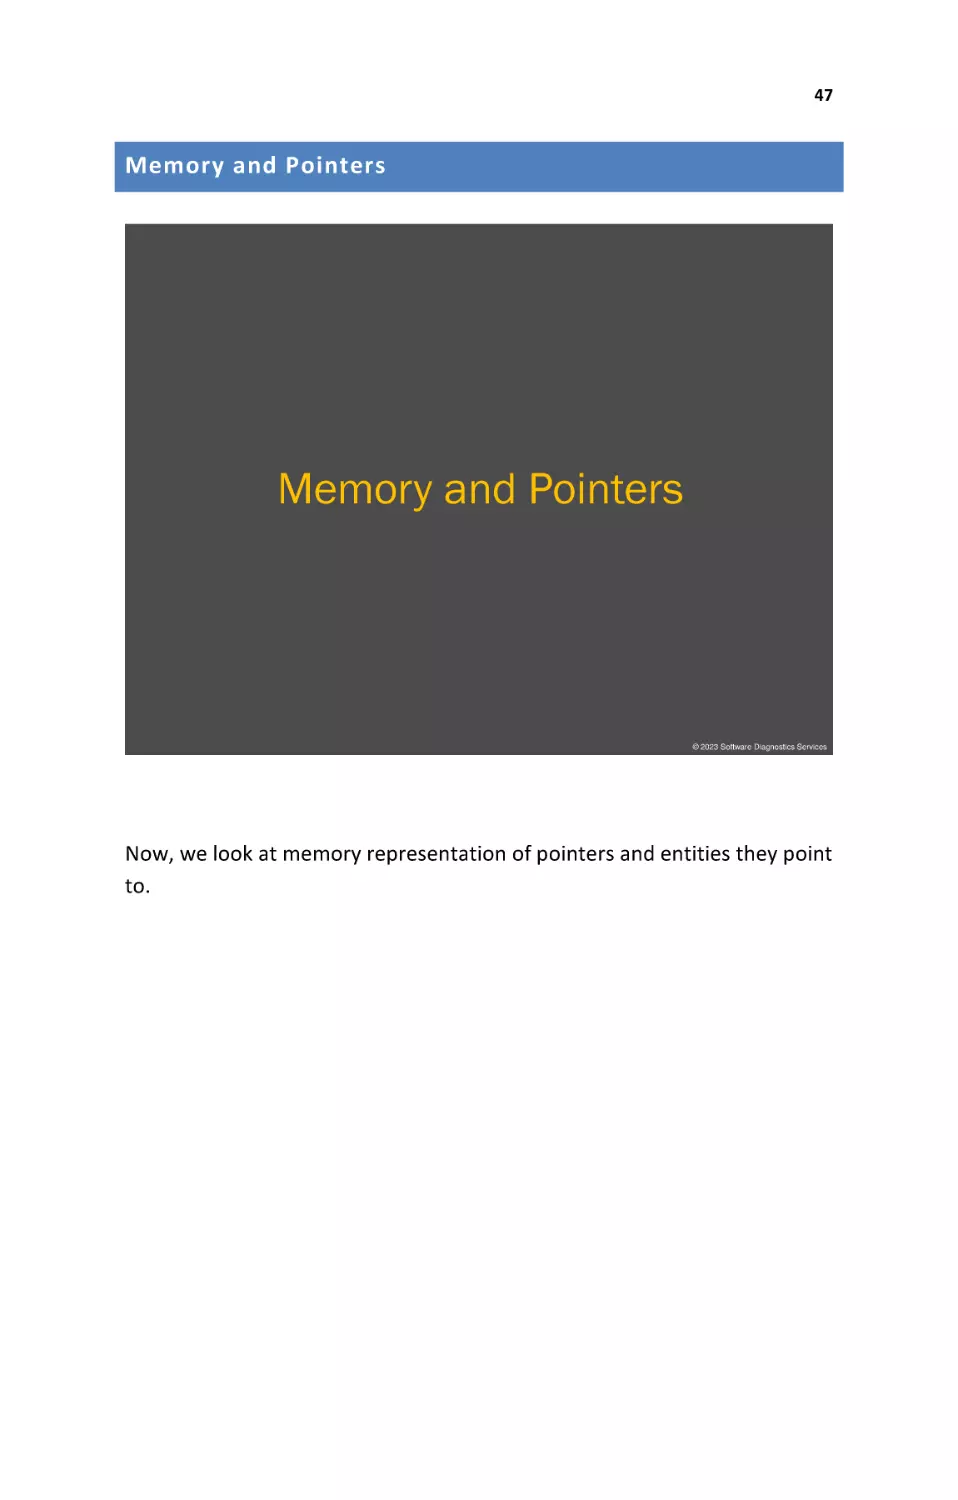 Memory and Pointers